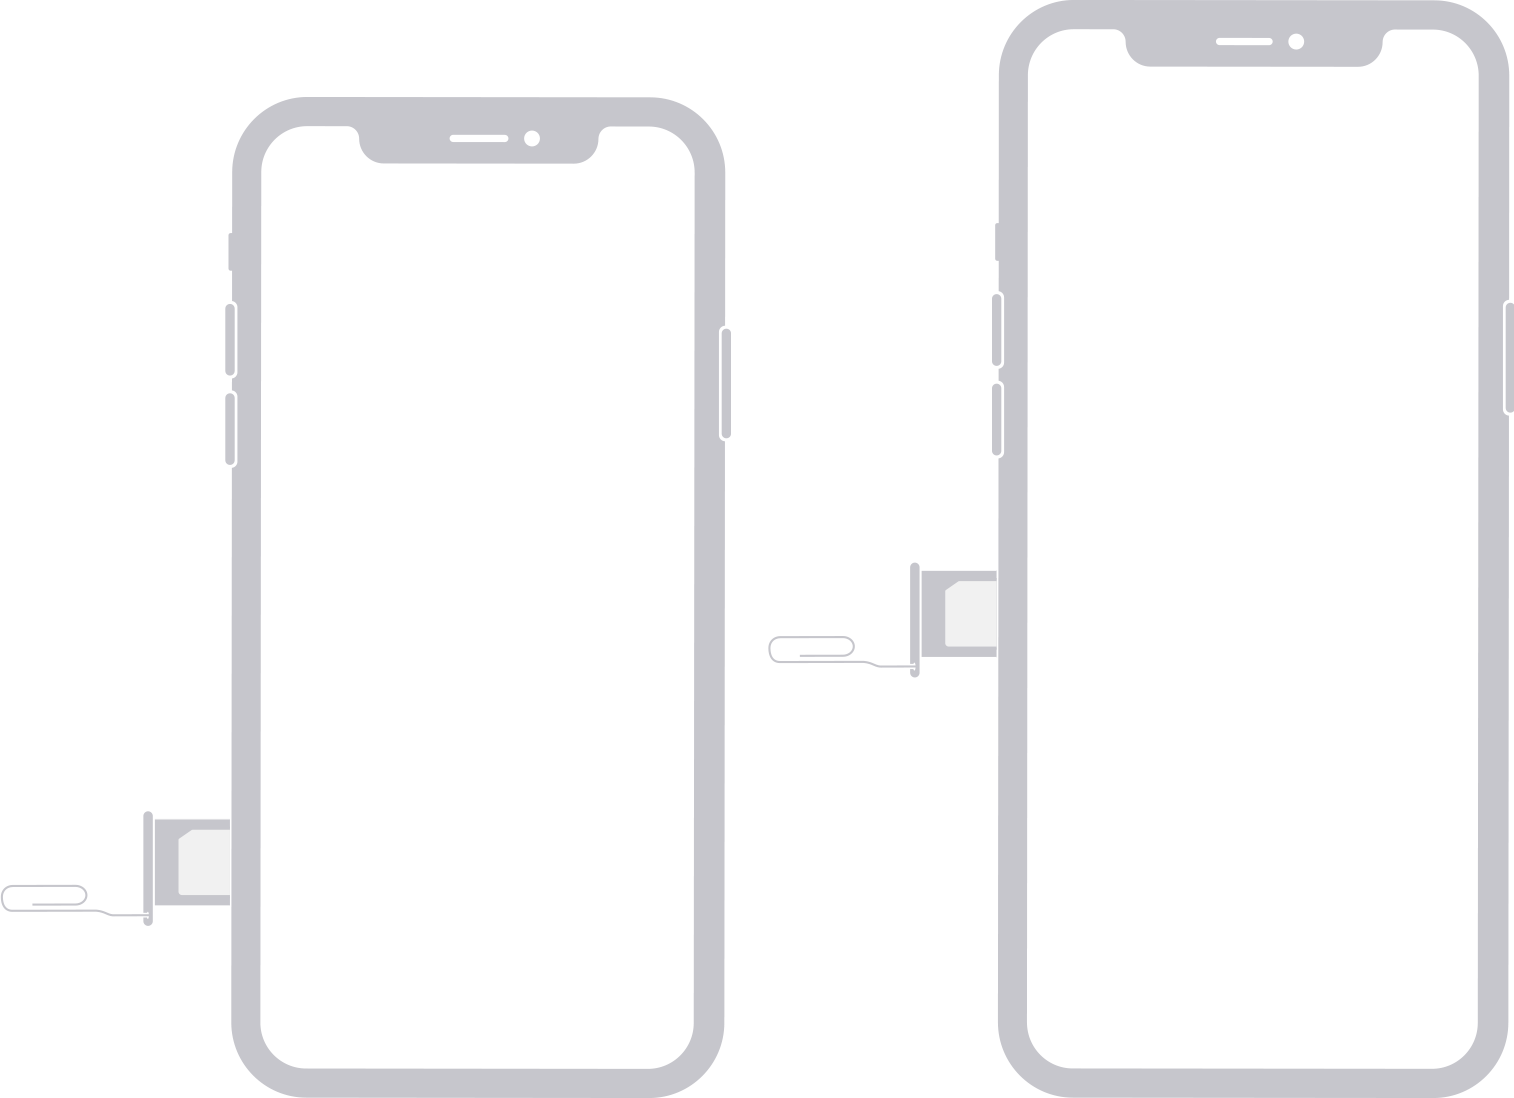 Image shows SIM on left side of iPhone